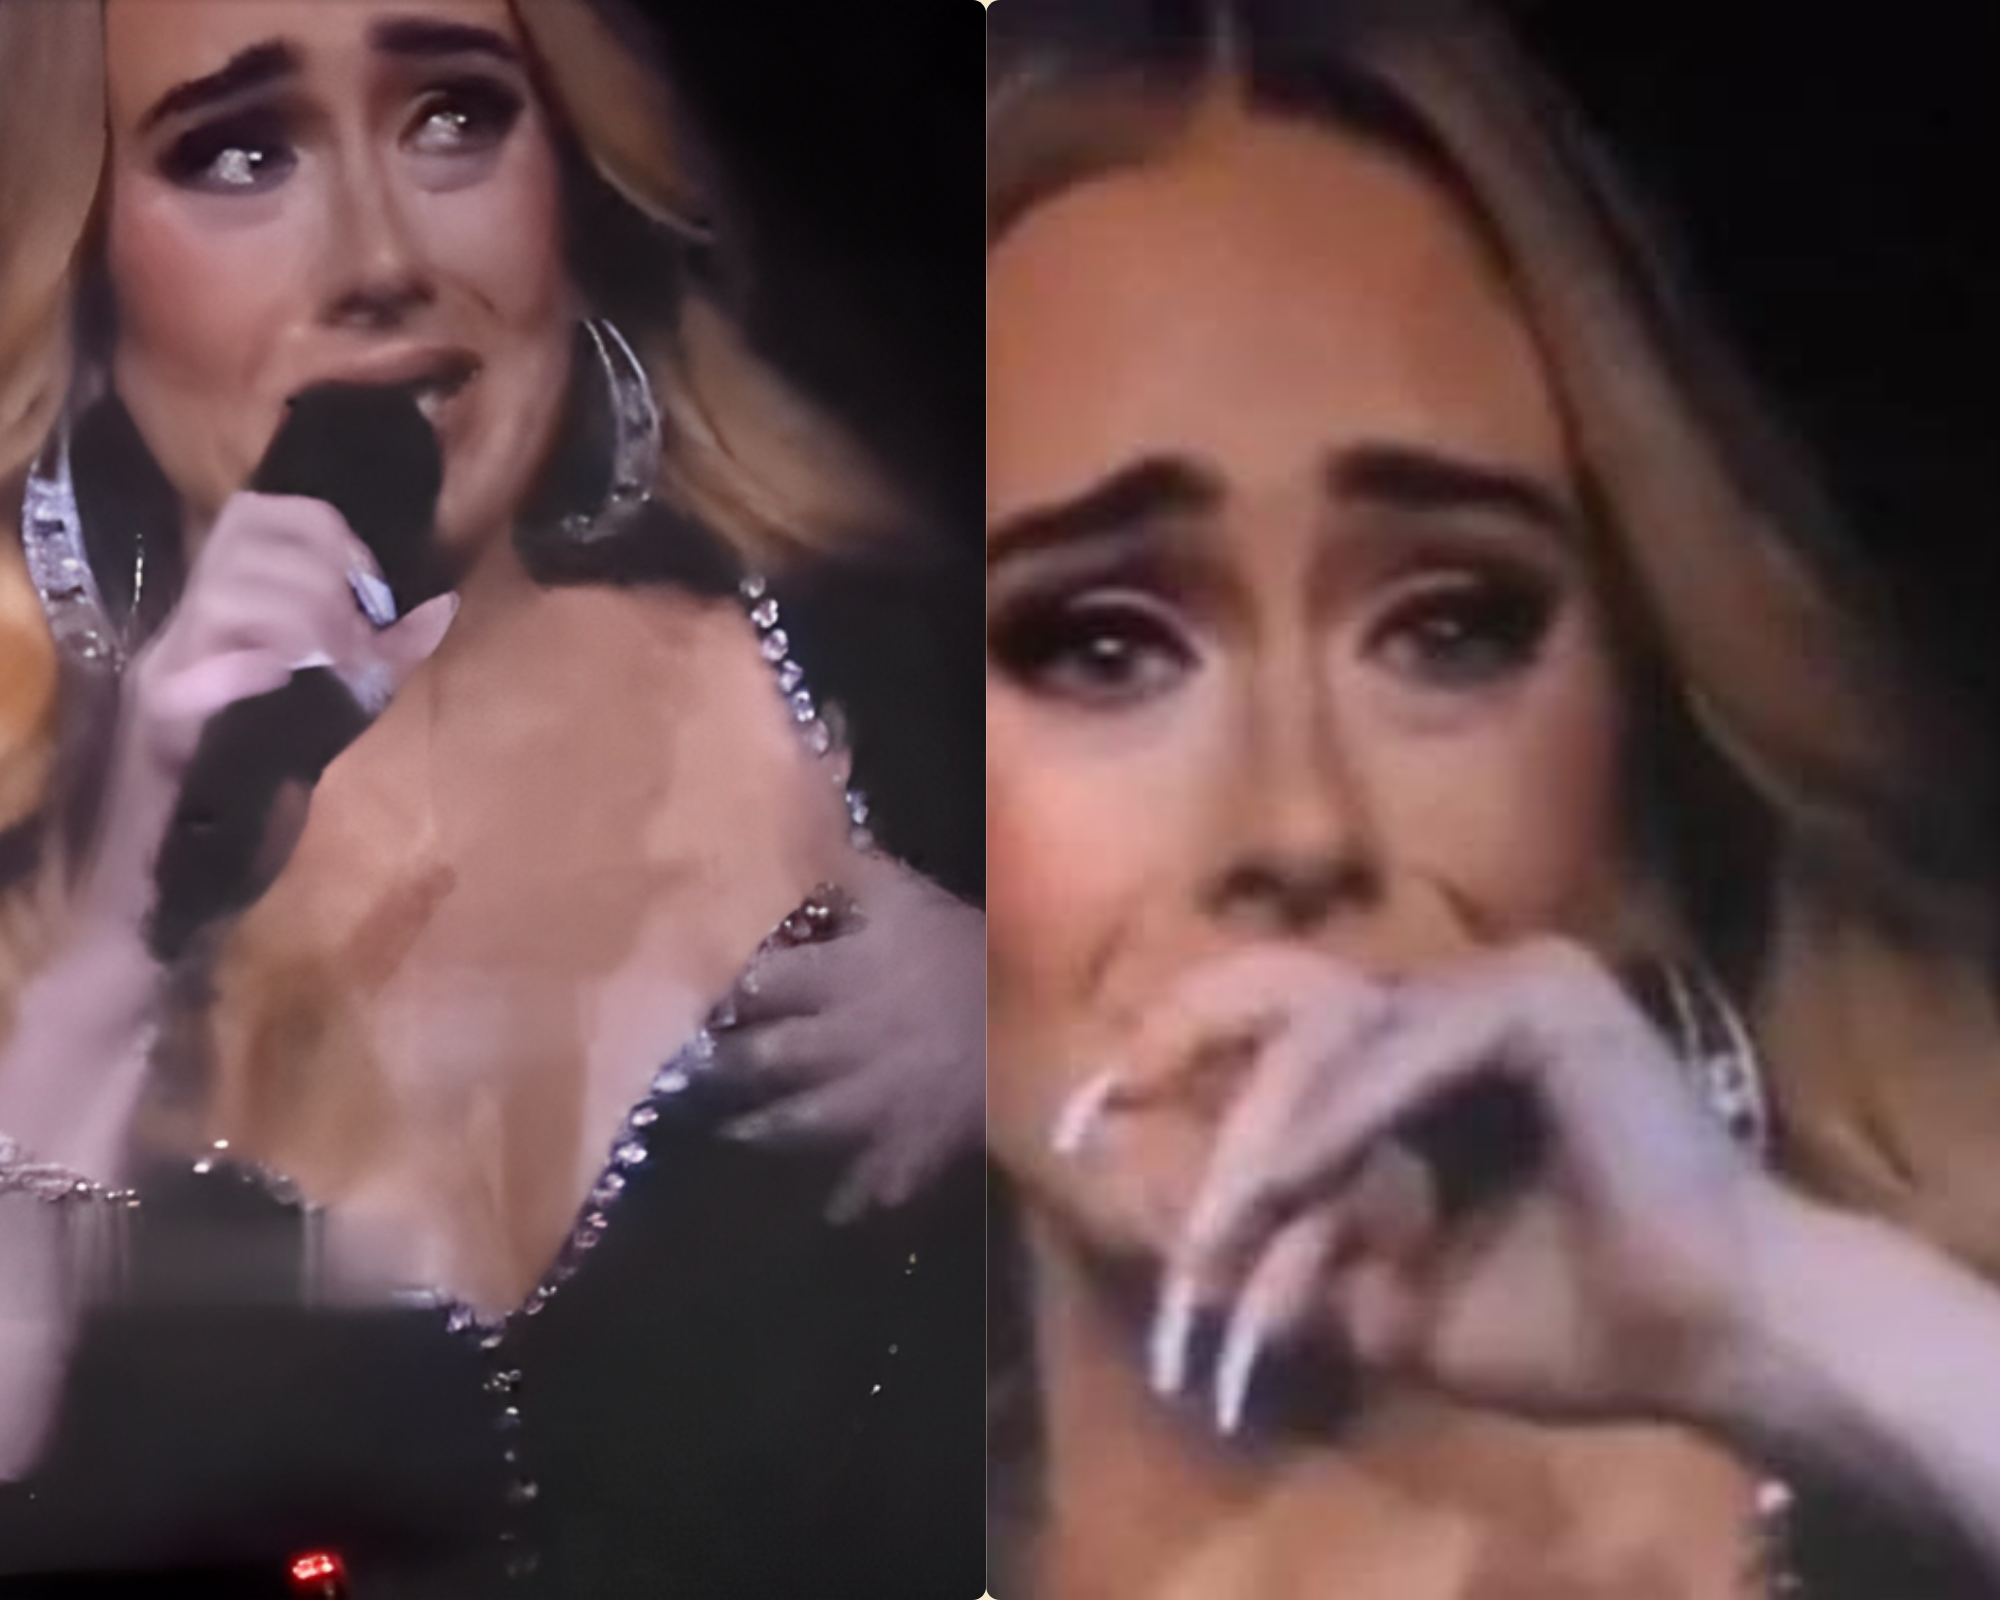 Man Promised Wife Adele Ticket: A Heartbreaking Story of Love and Loss [Video]